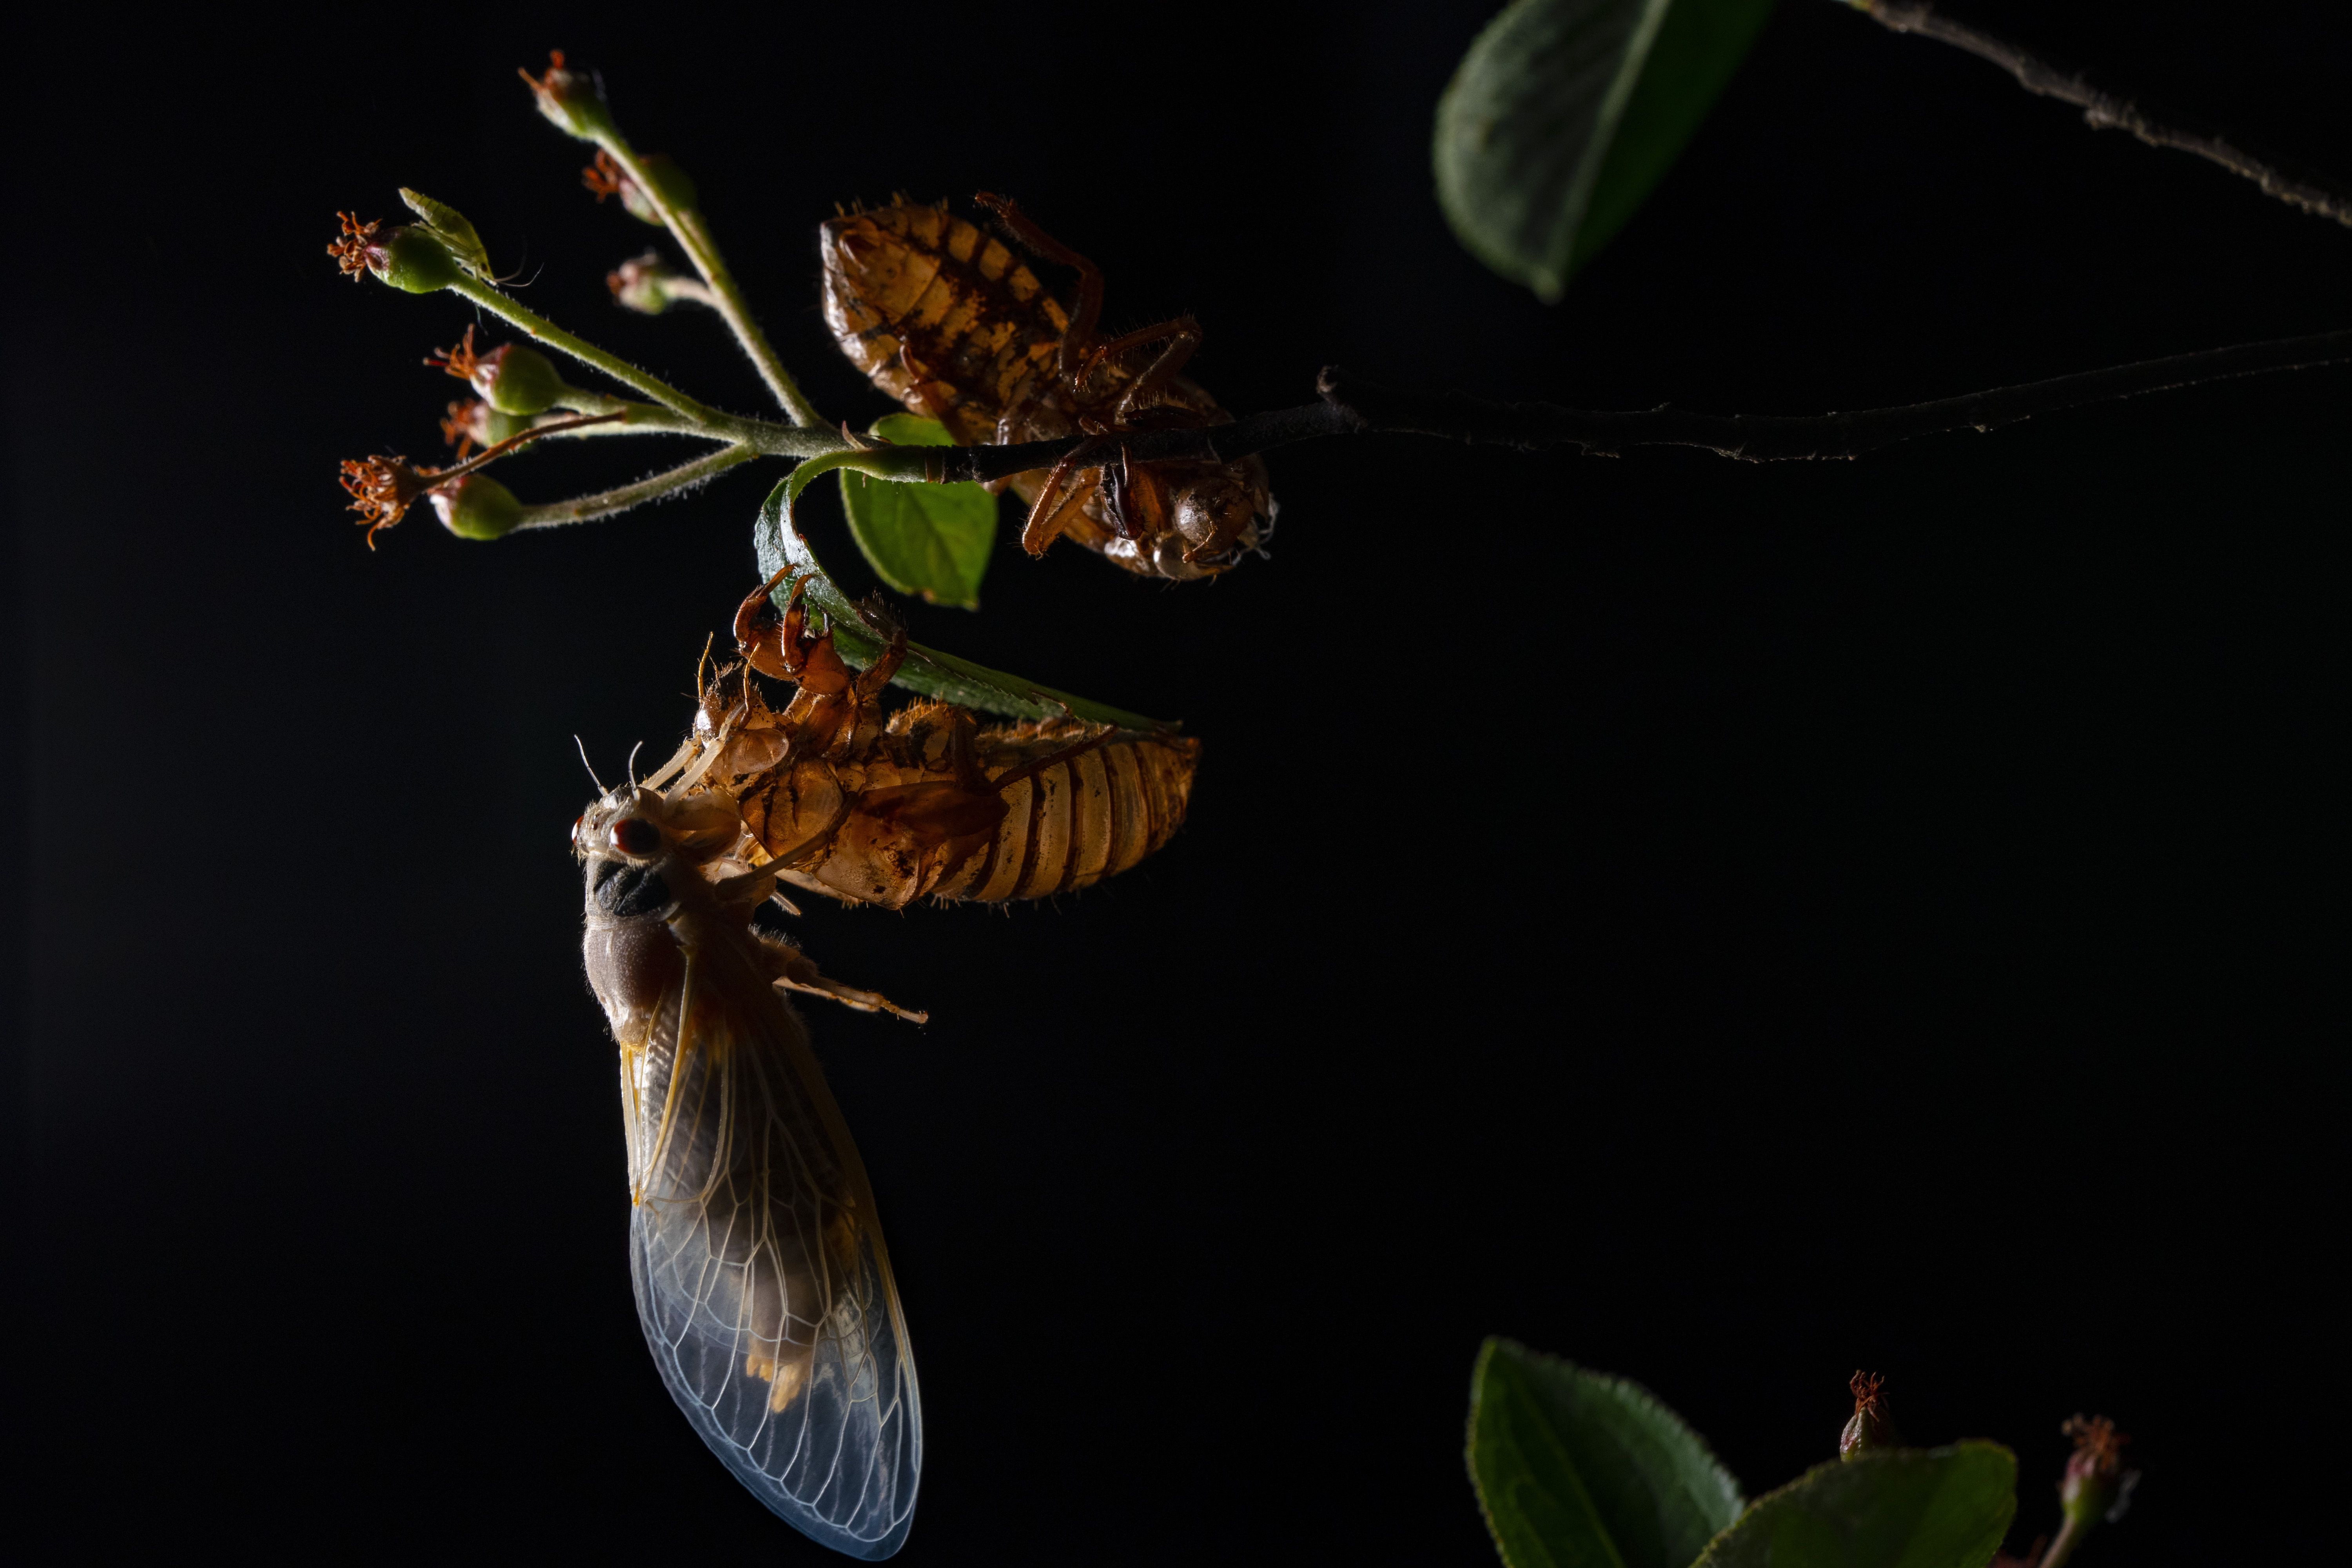 Jessica Koscielniak / USA TODAY; Alpha 9 II, FE 90mm F2.8 Macro G OSS, 1/80, f/9, ISO 800; A periodical cicada clings to its shell on the side of a tree on May 17, 2021 in Takoma Park, MD.